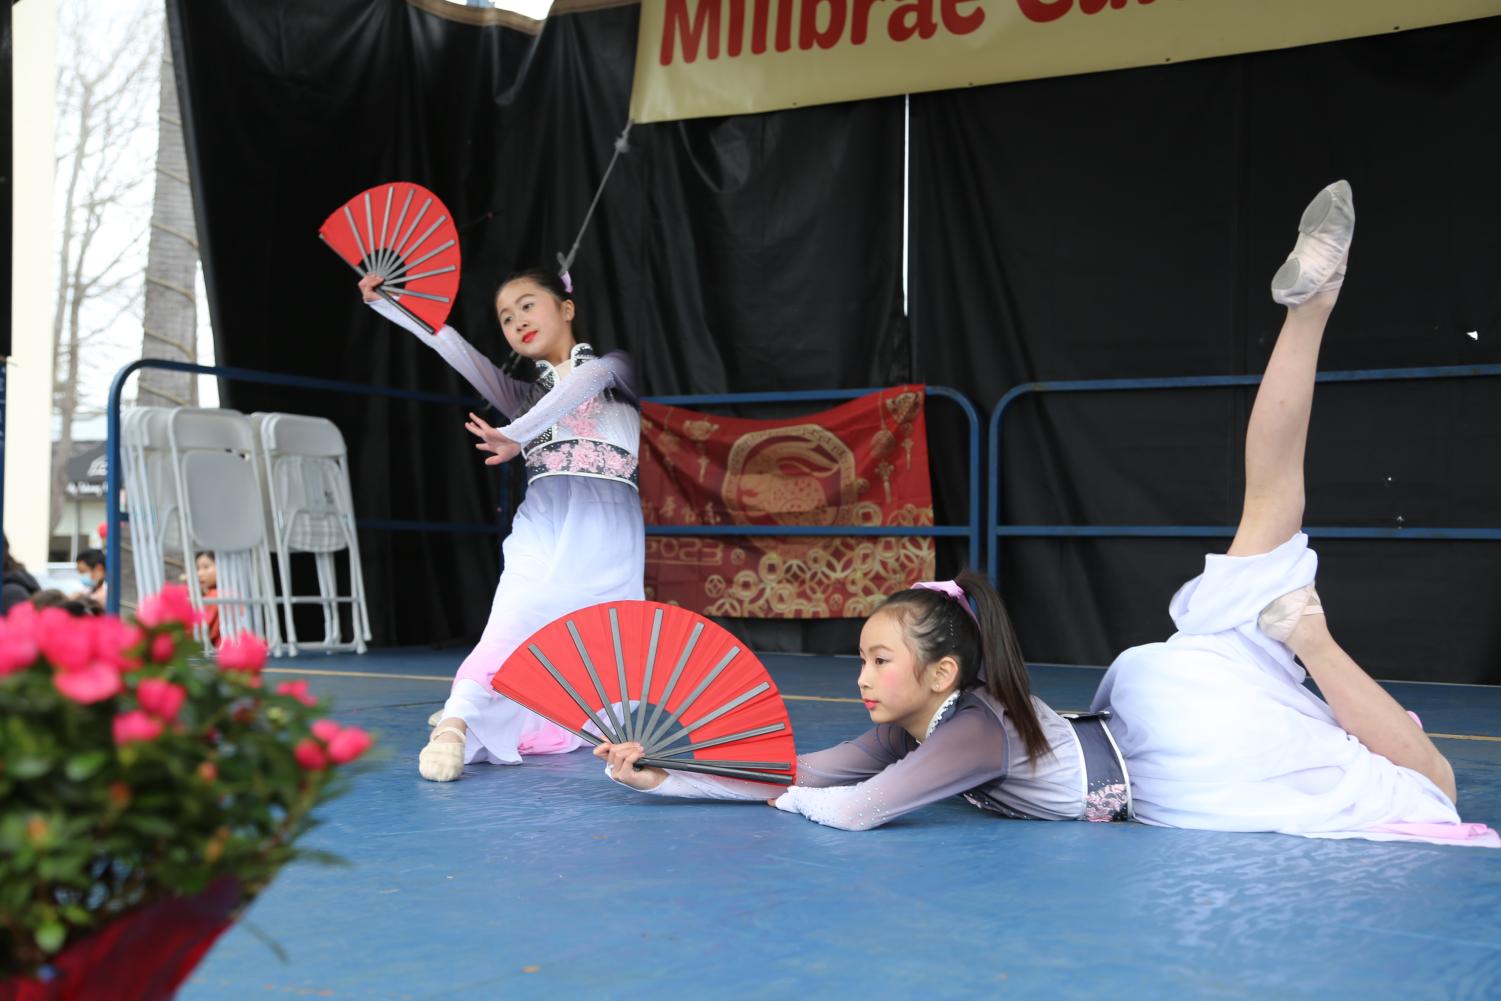 Millbrae%E2%80%99s+Lunar+New+Year+Festival+unites+culture%2C+community+and+cuisine+in+celebration+of+Asian+heritage